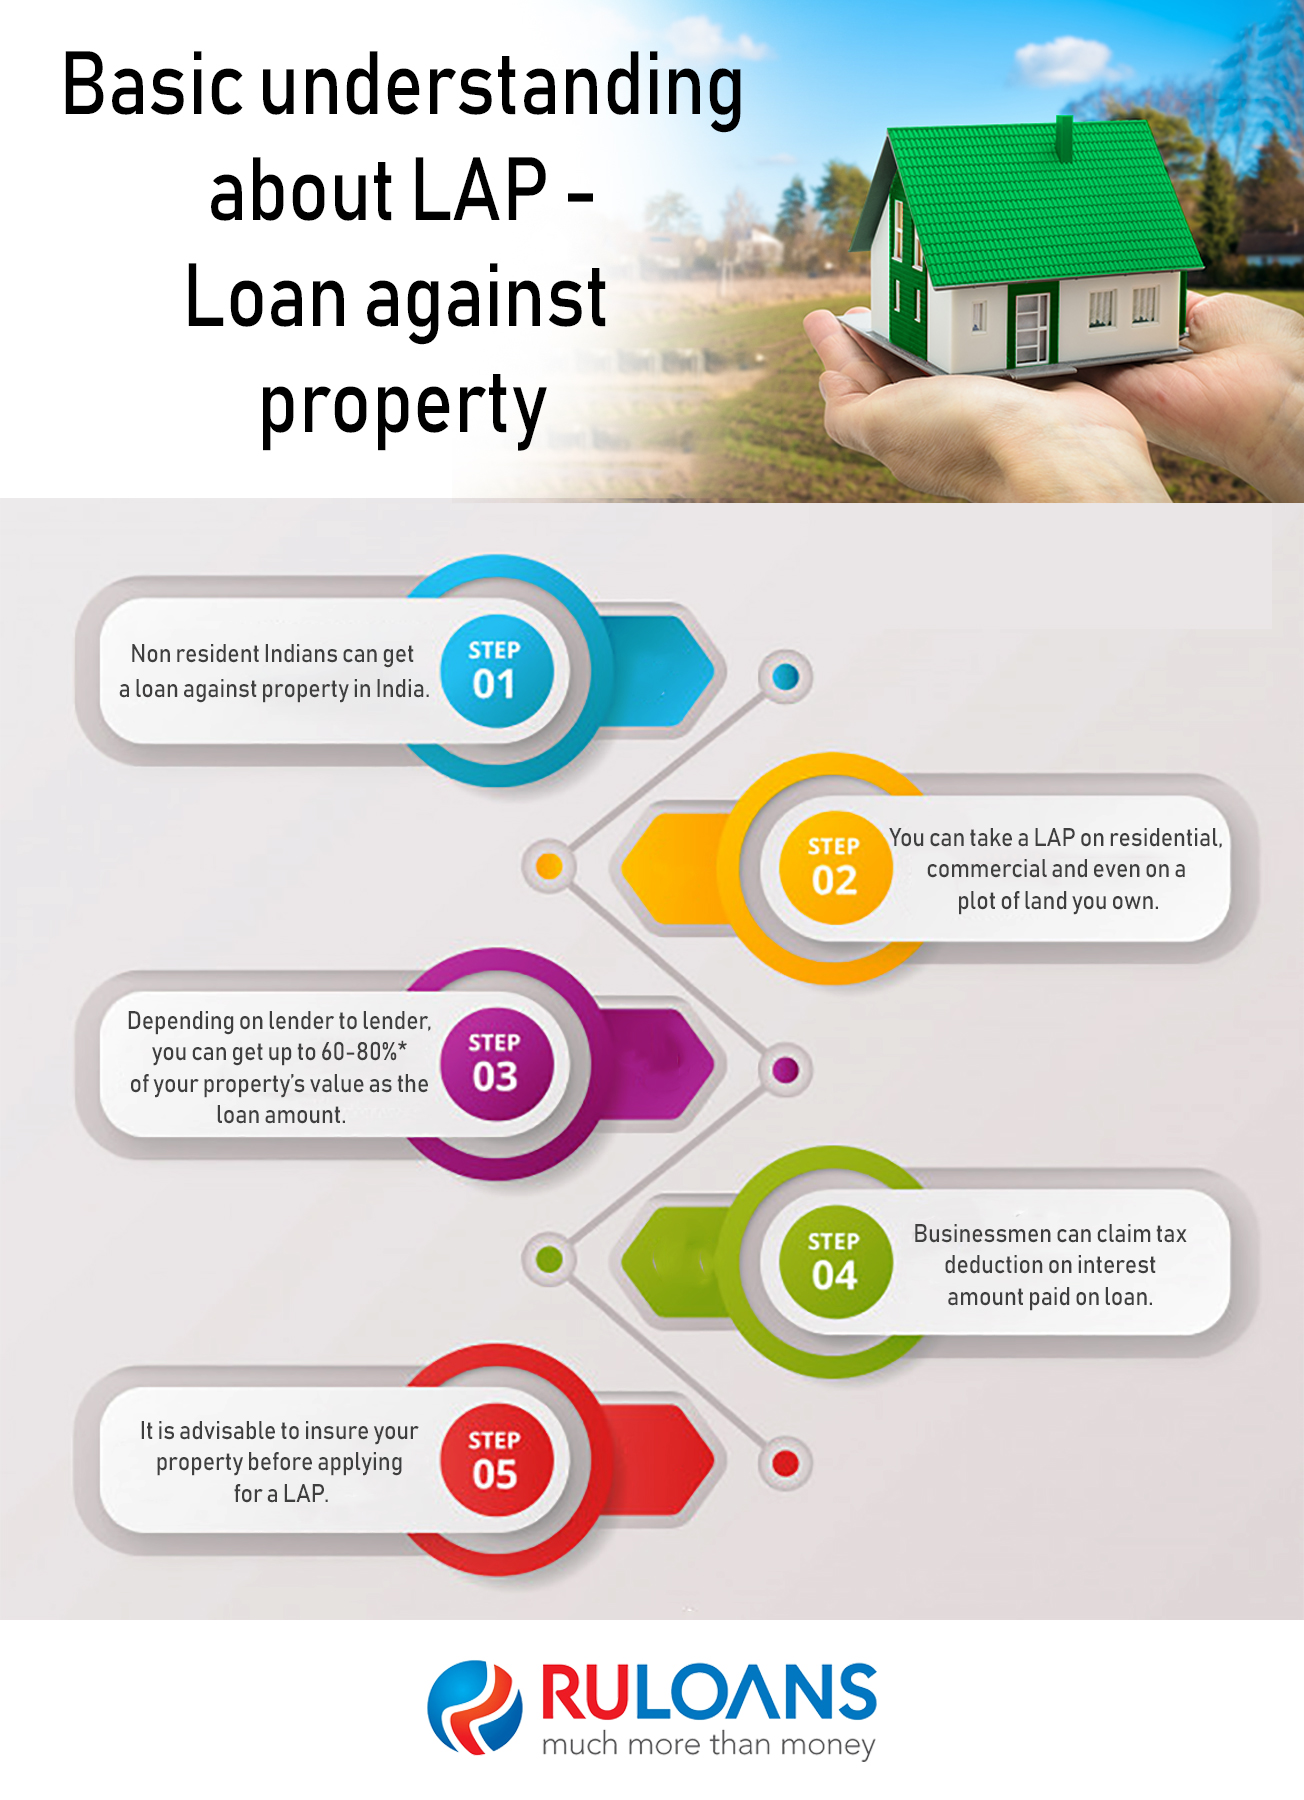 Basic understanding about Loan against property